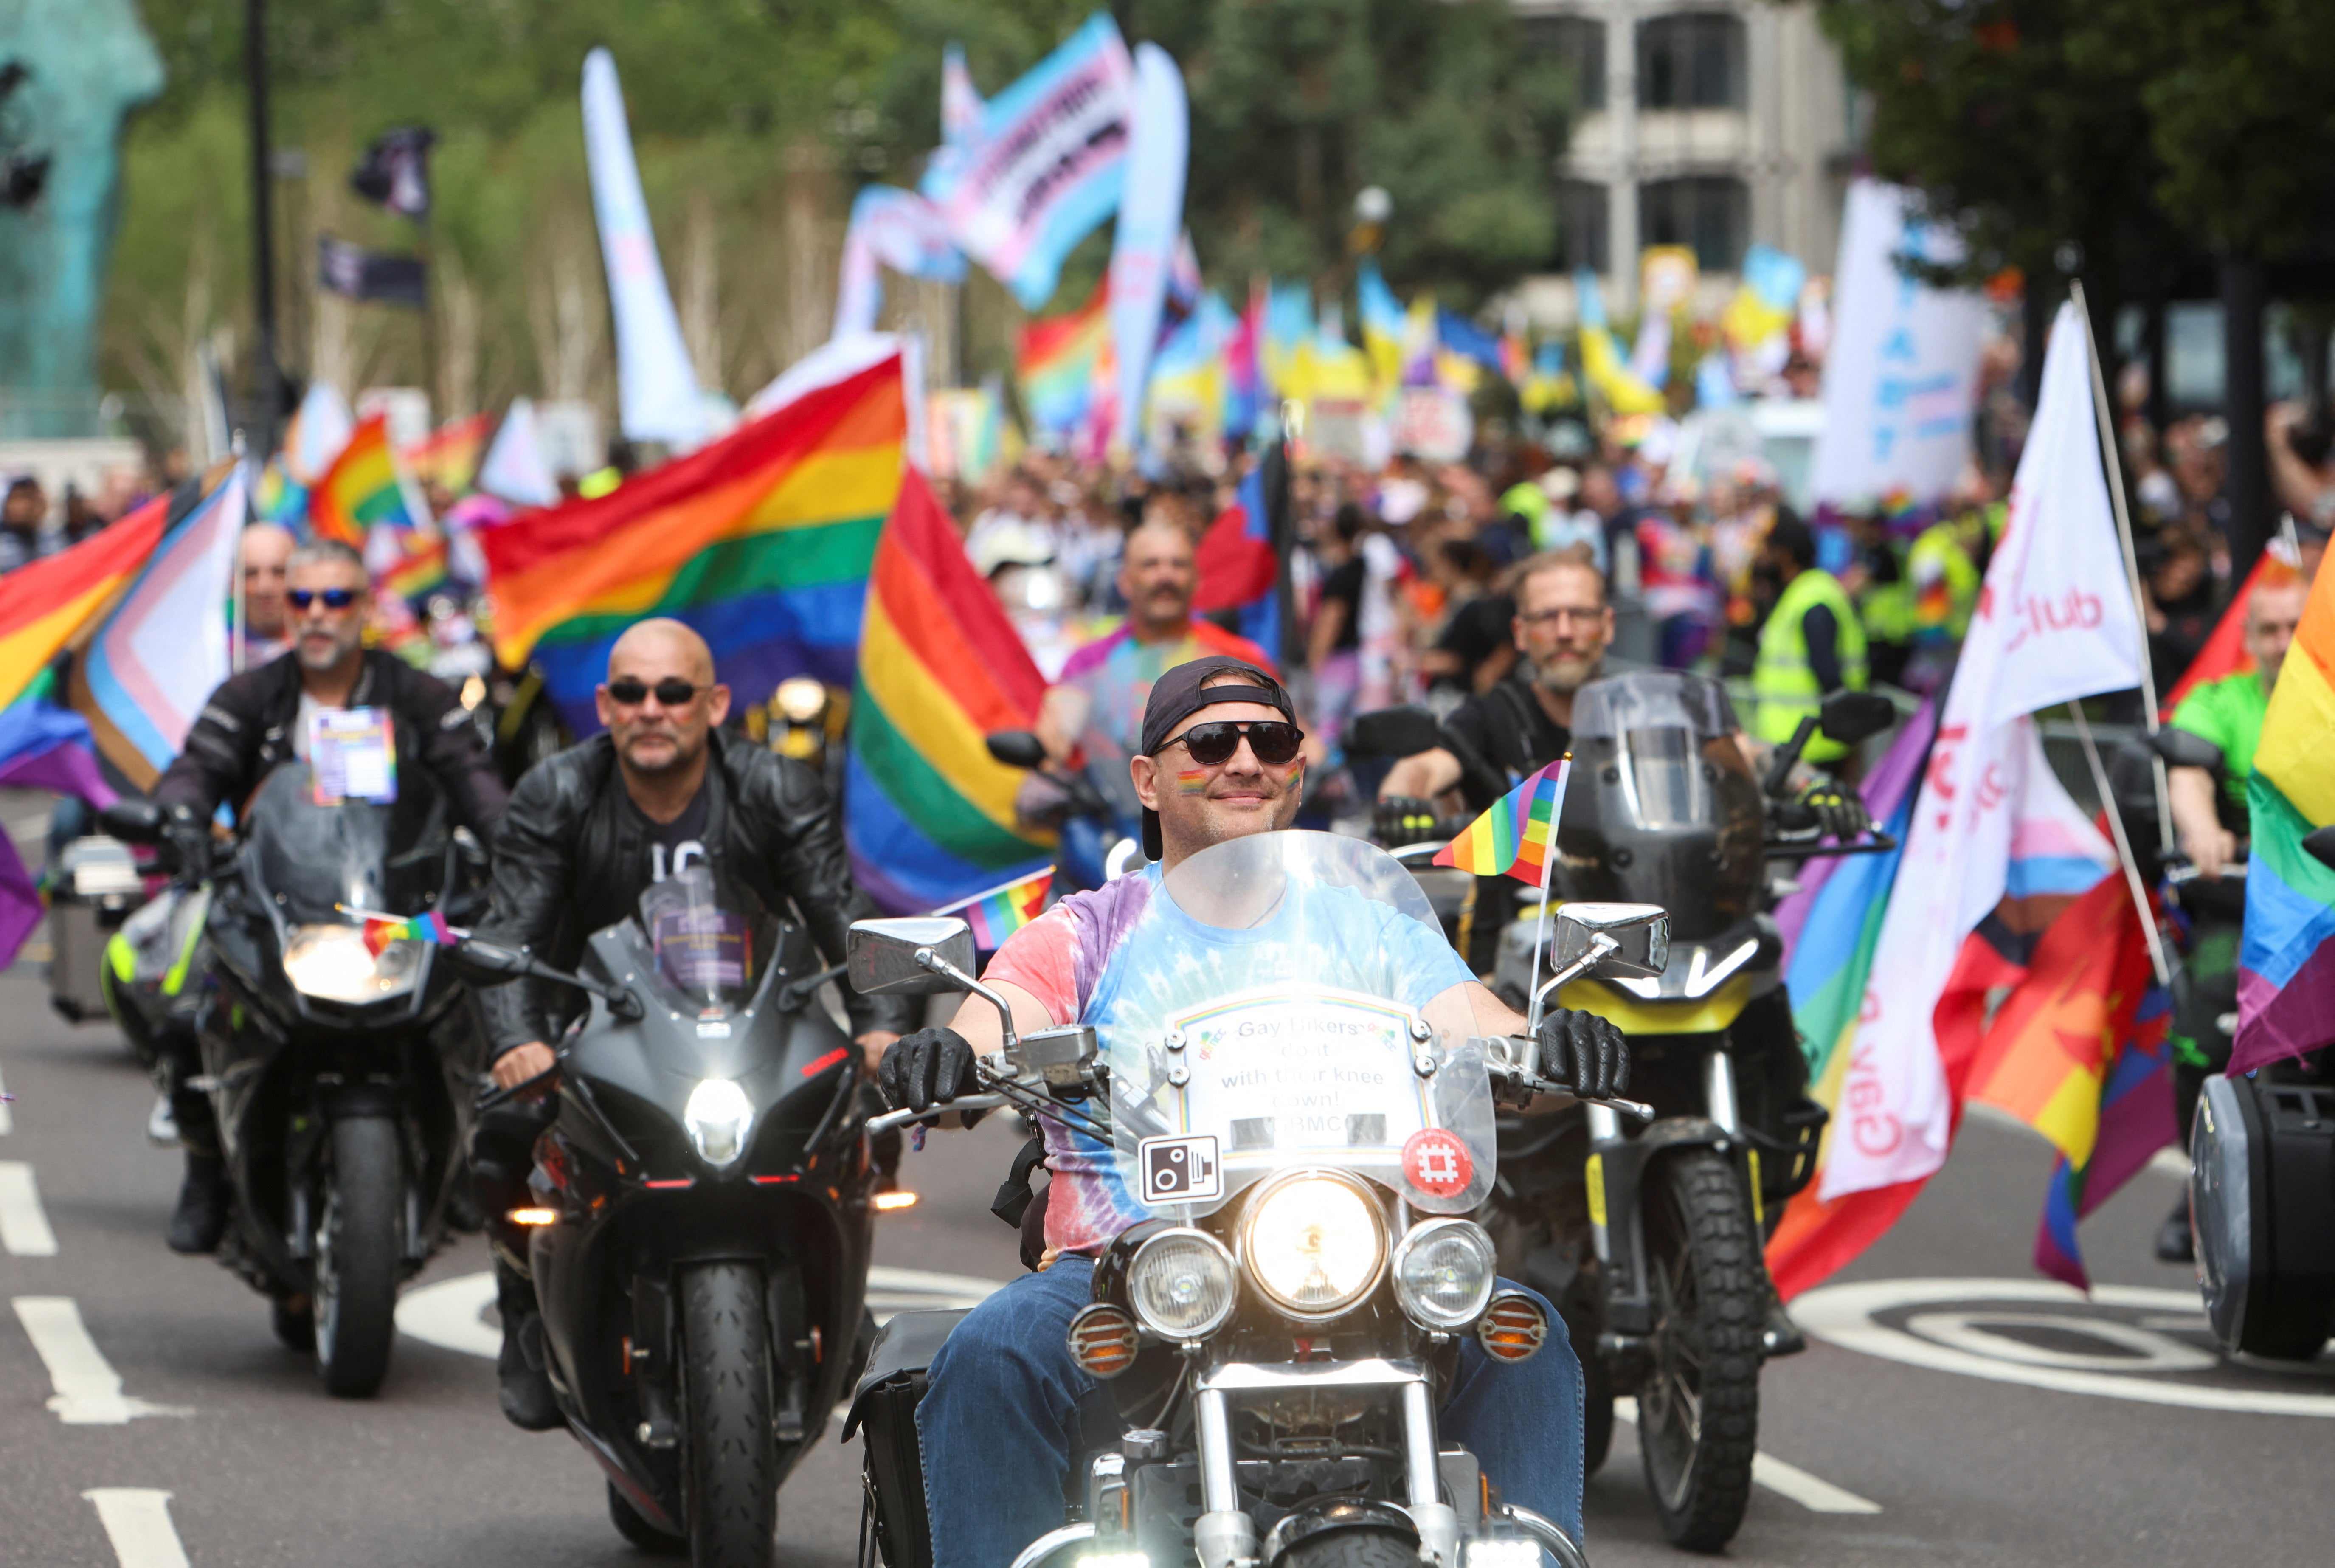 The colourful Pride in London Parade on Saturday